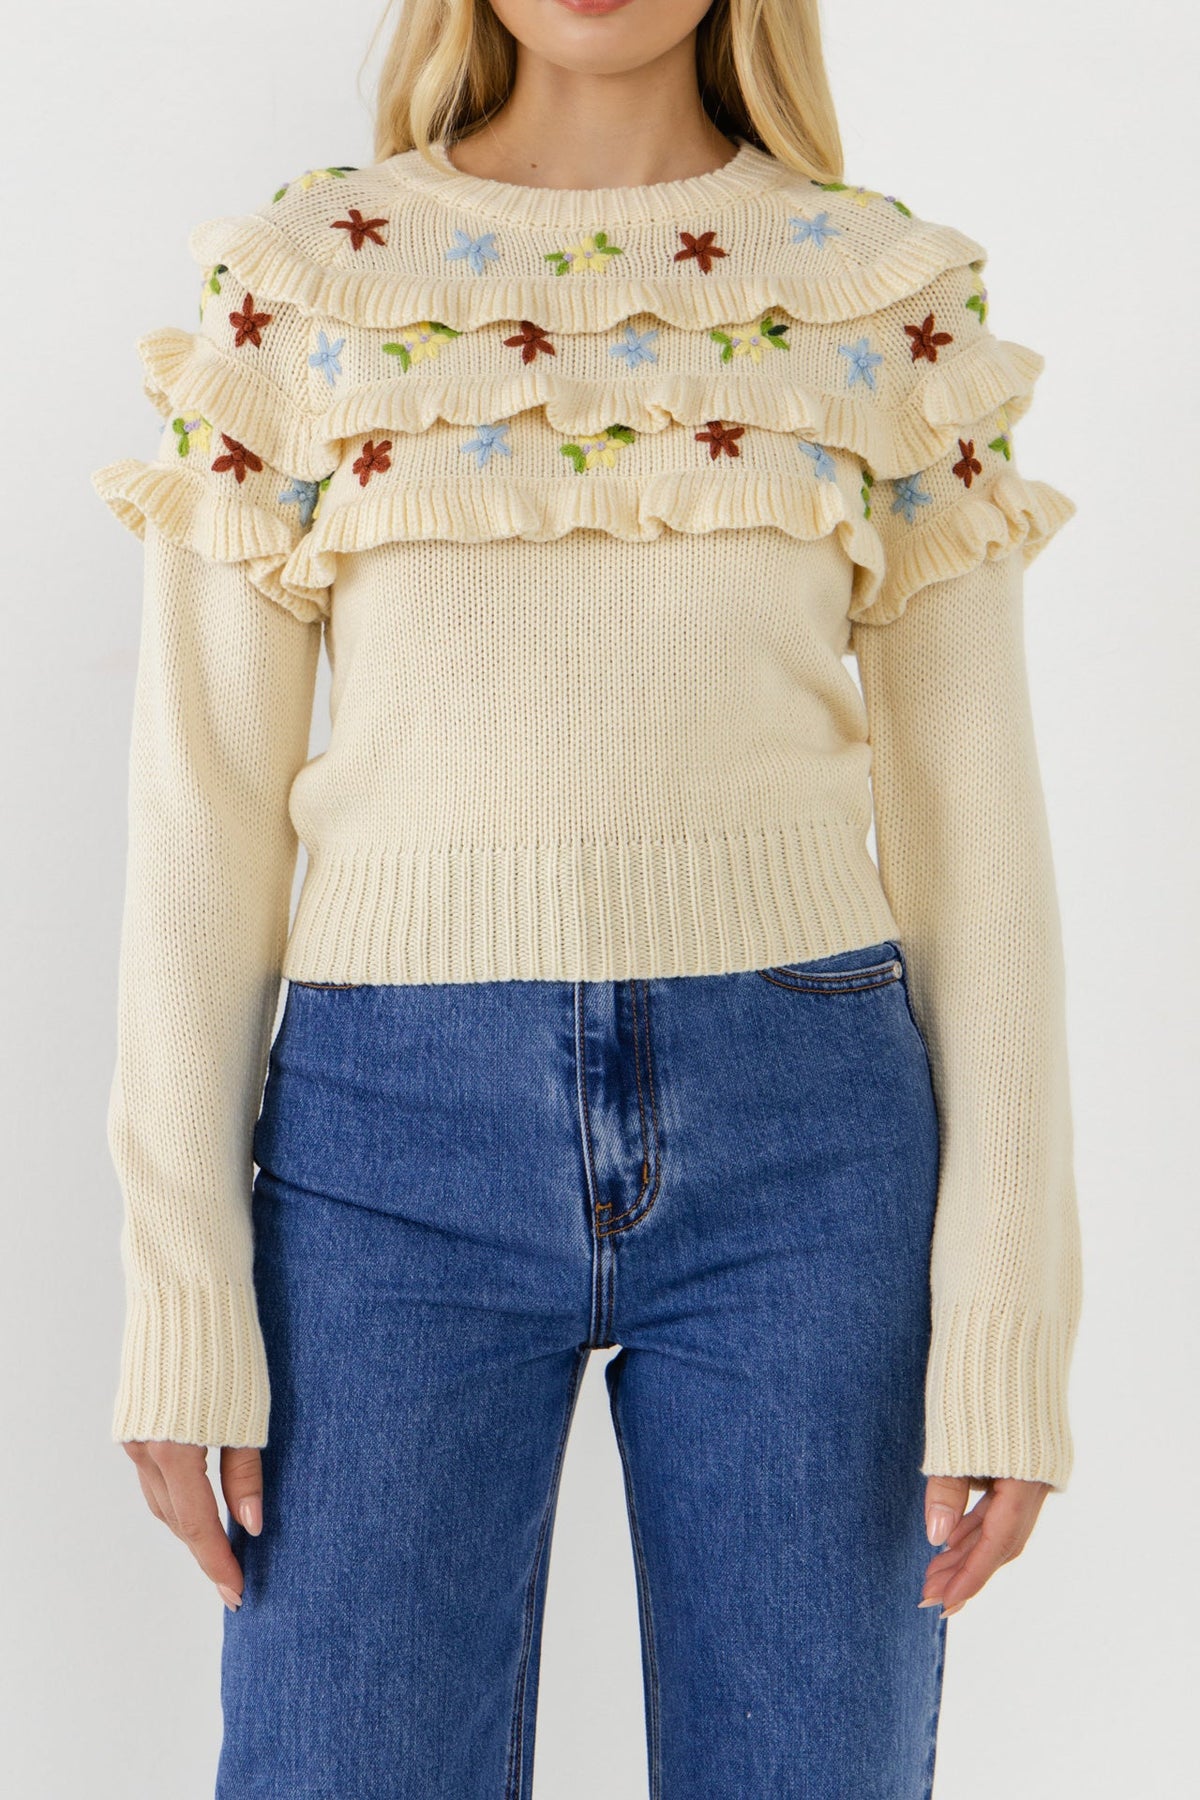 FREE THE ROSES - Floral Handmade Embroidery Ruffle Detail Sweater - SWEATERS & KNITS available at Objectrare